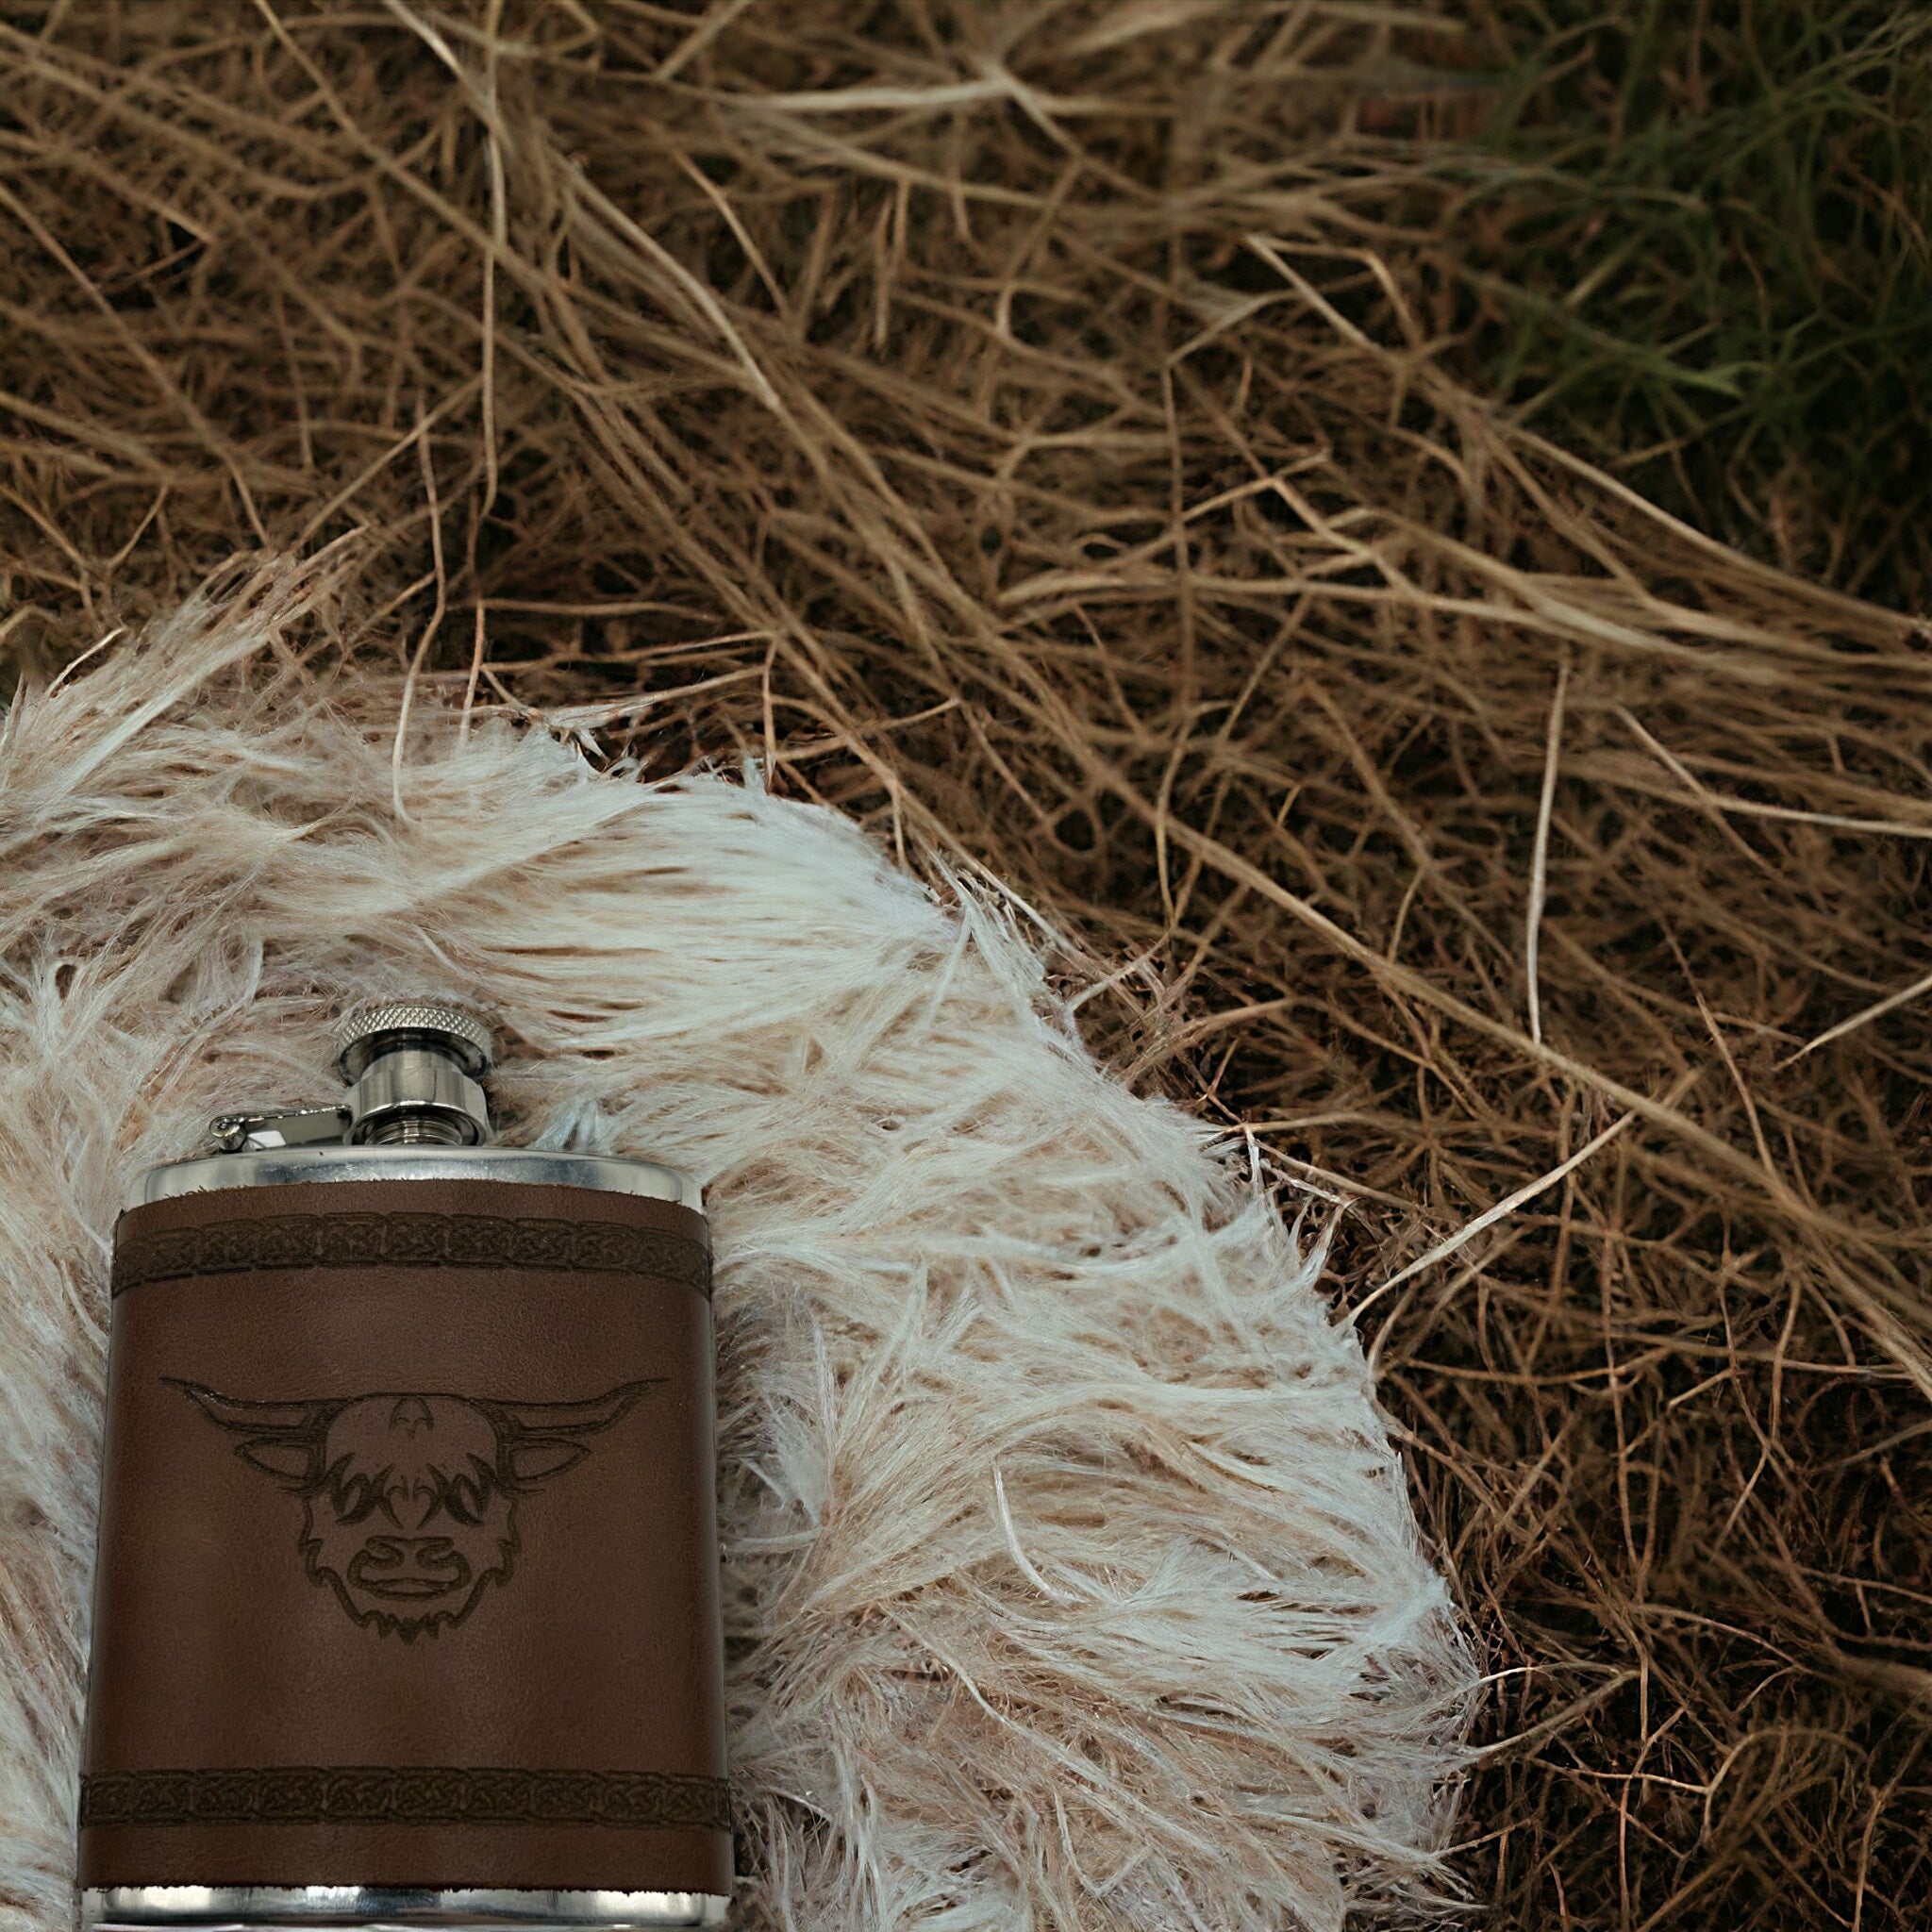 6 oz Engraved Highland Cow Pewter & Leather Hip Flask